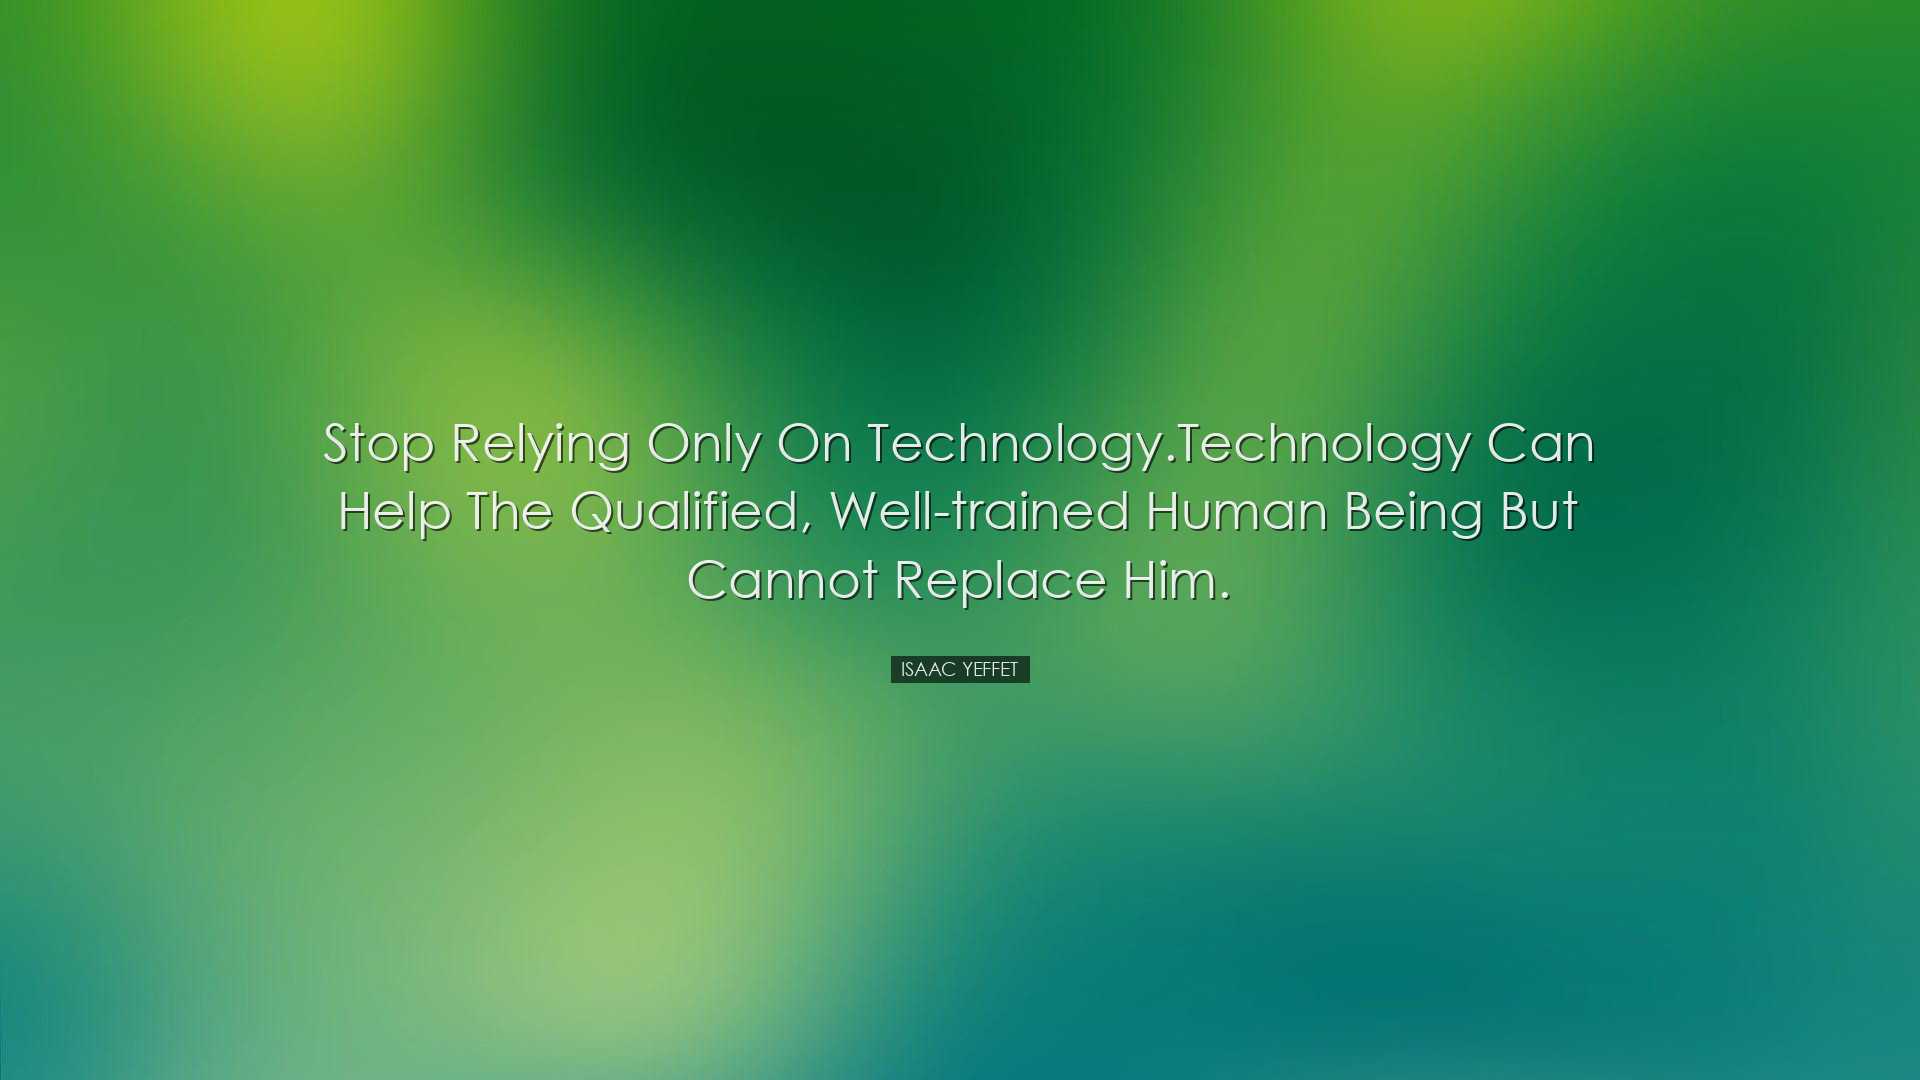 Stop relying only on technology.Technology can help the qualified,